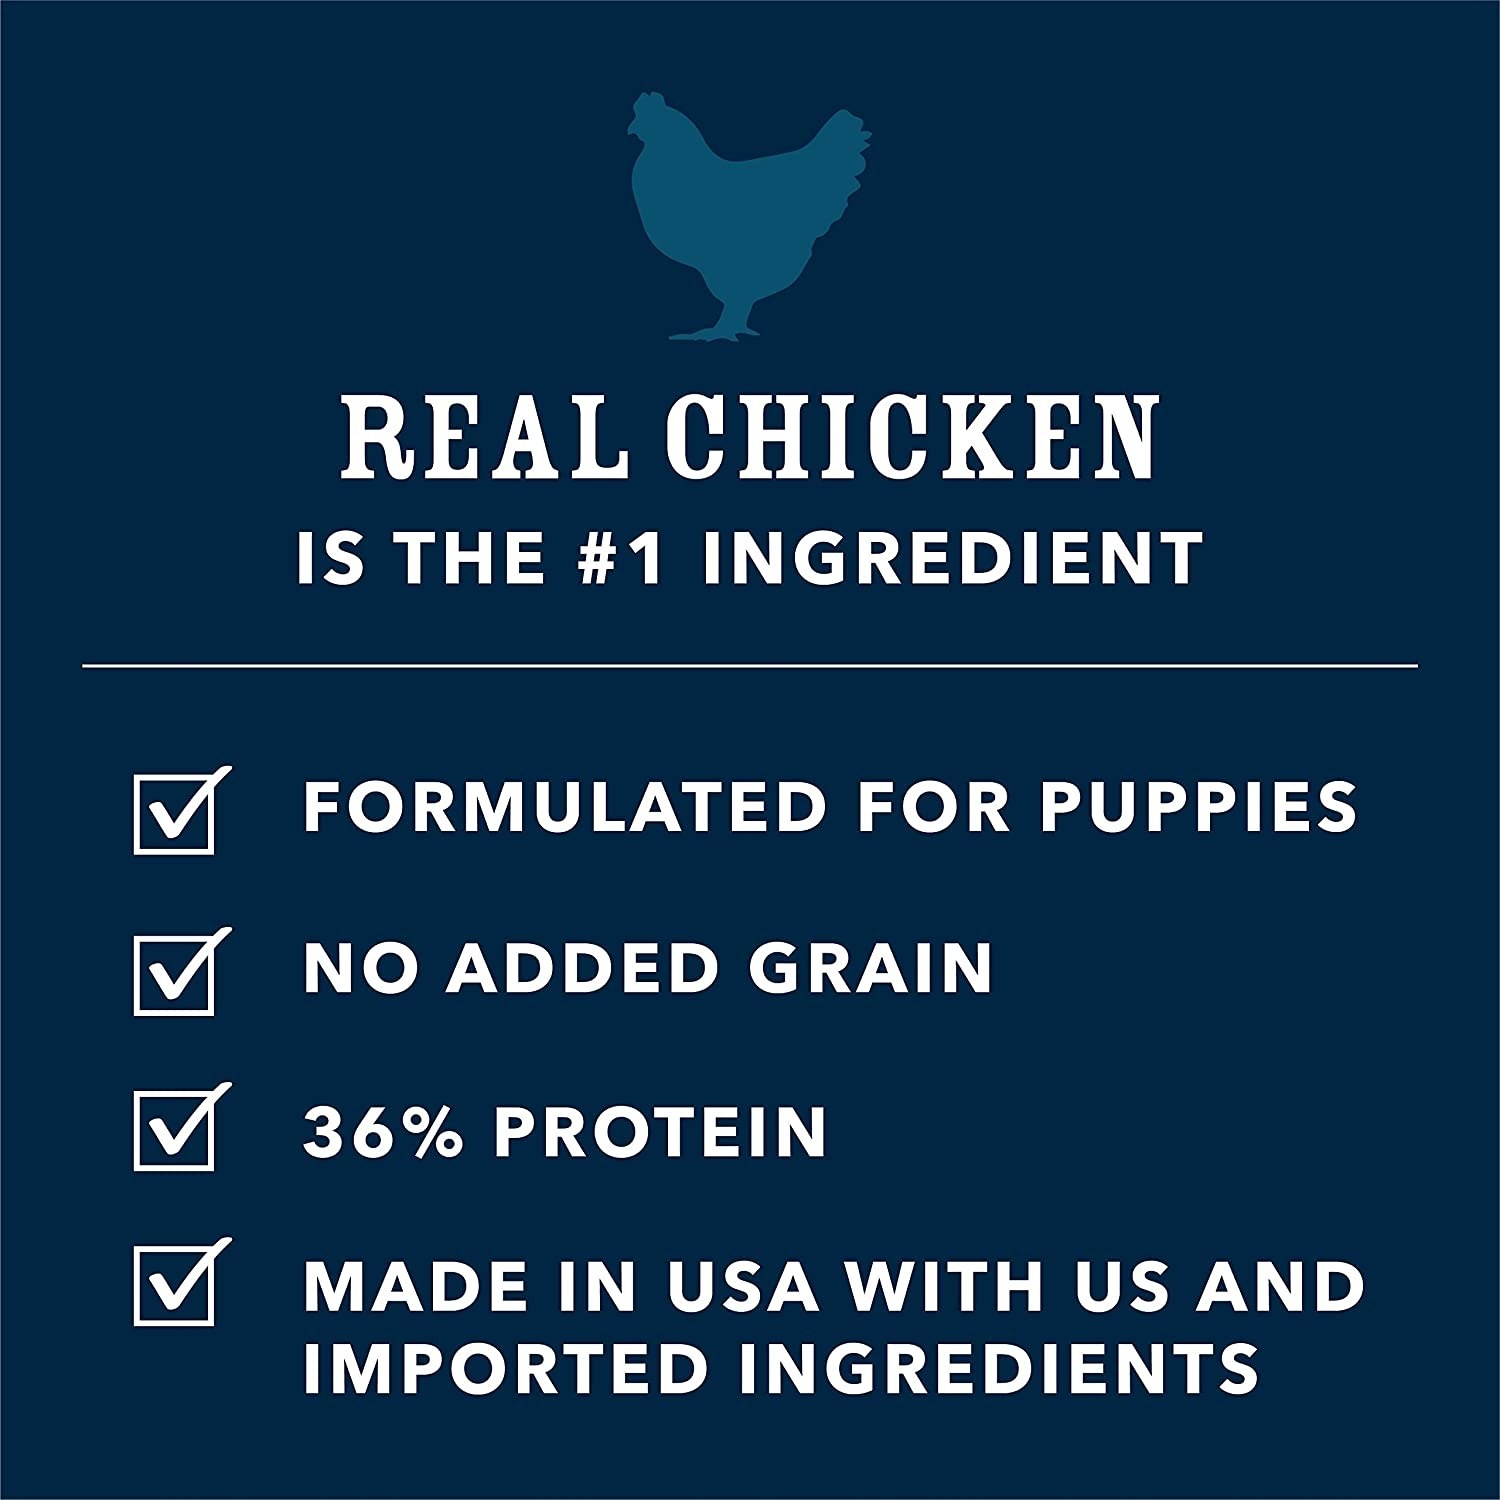 Chart about chicken in the ingredients